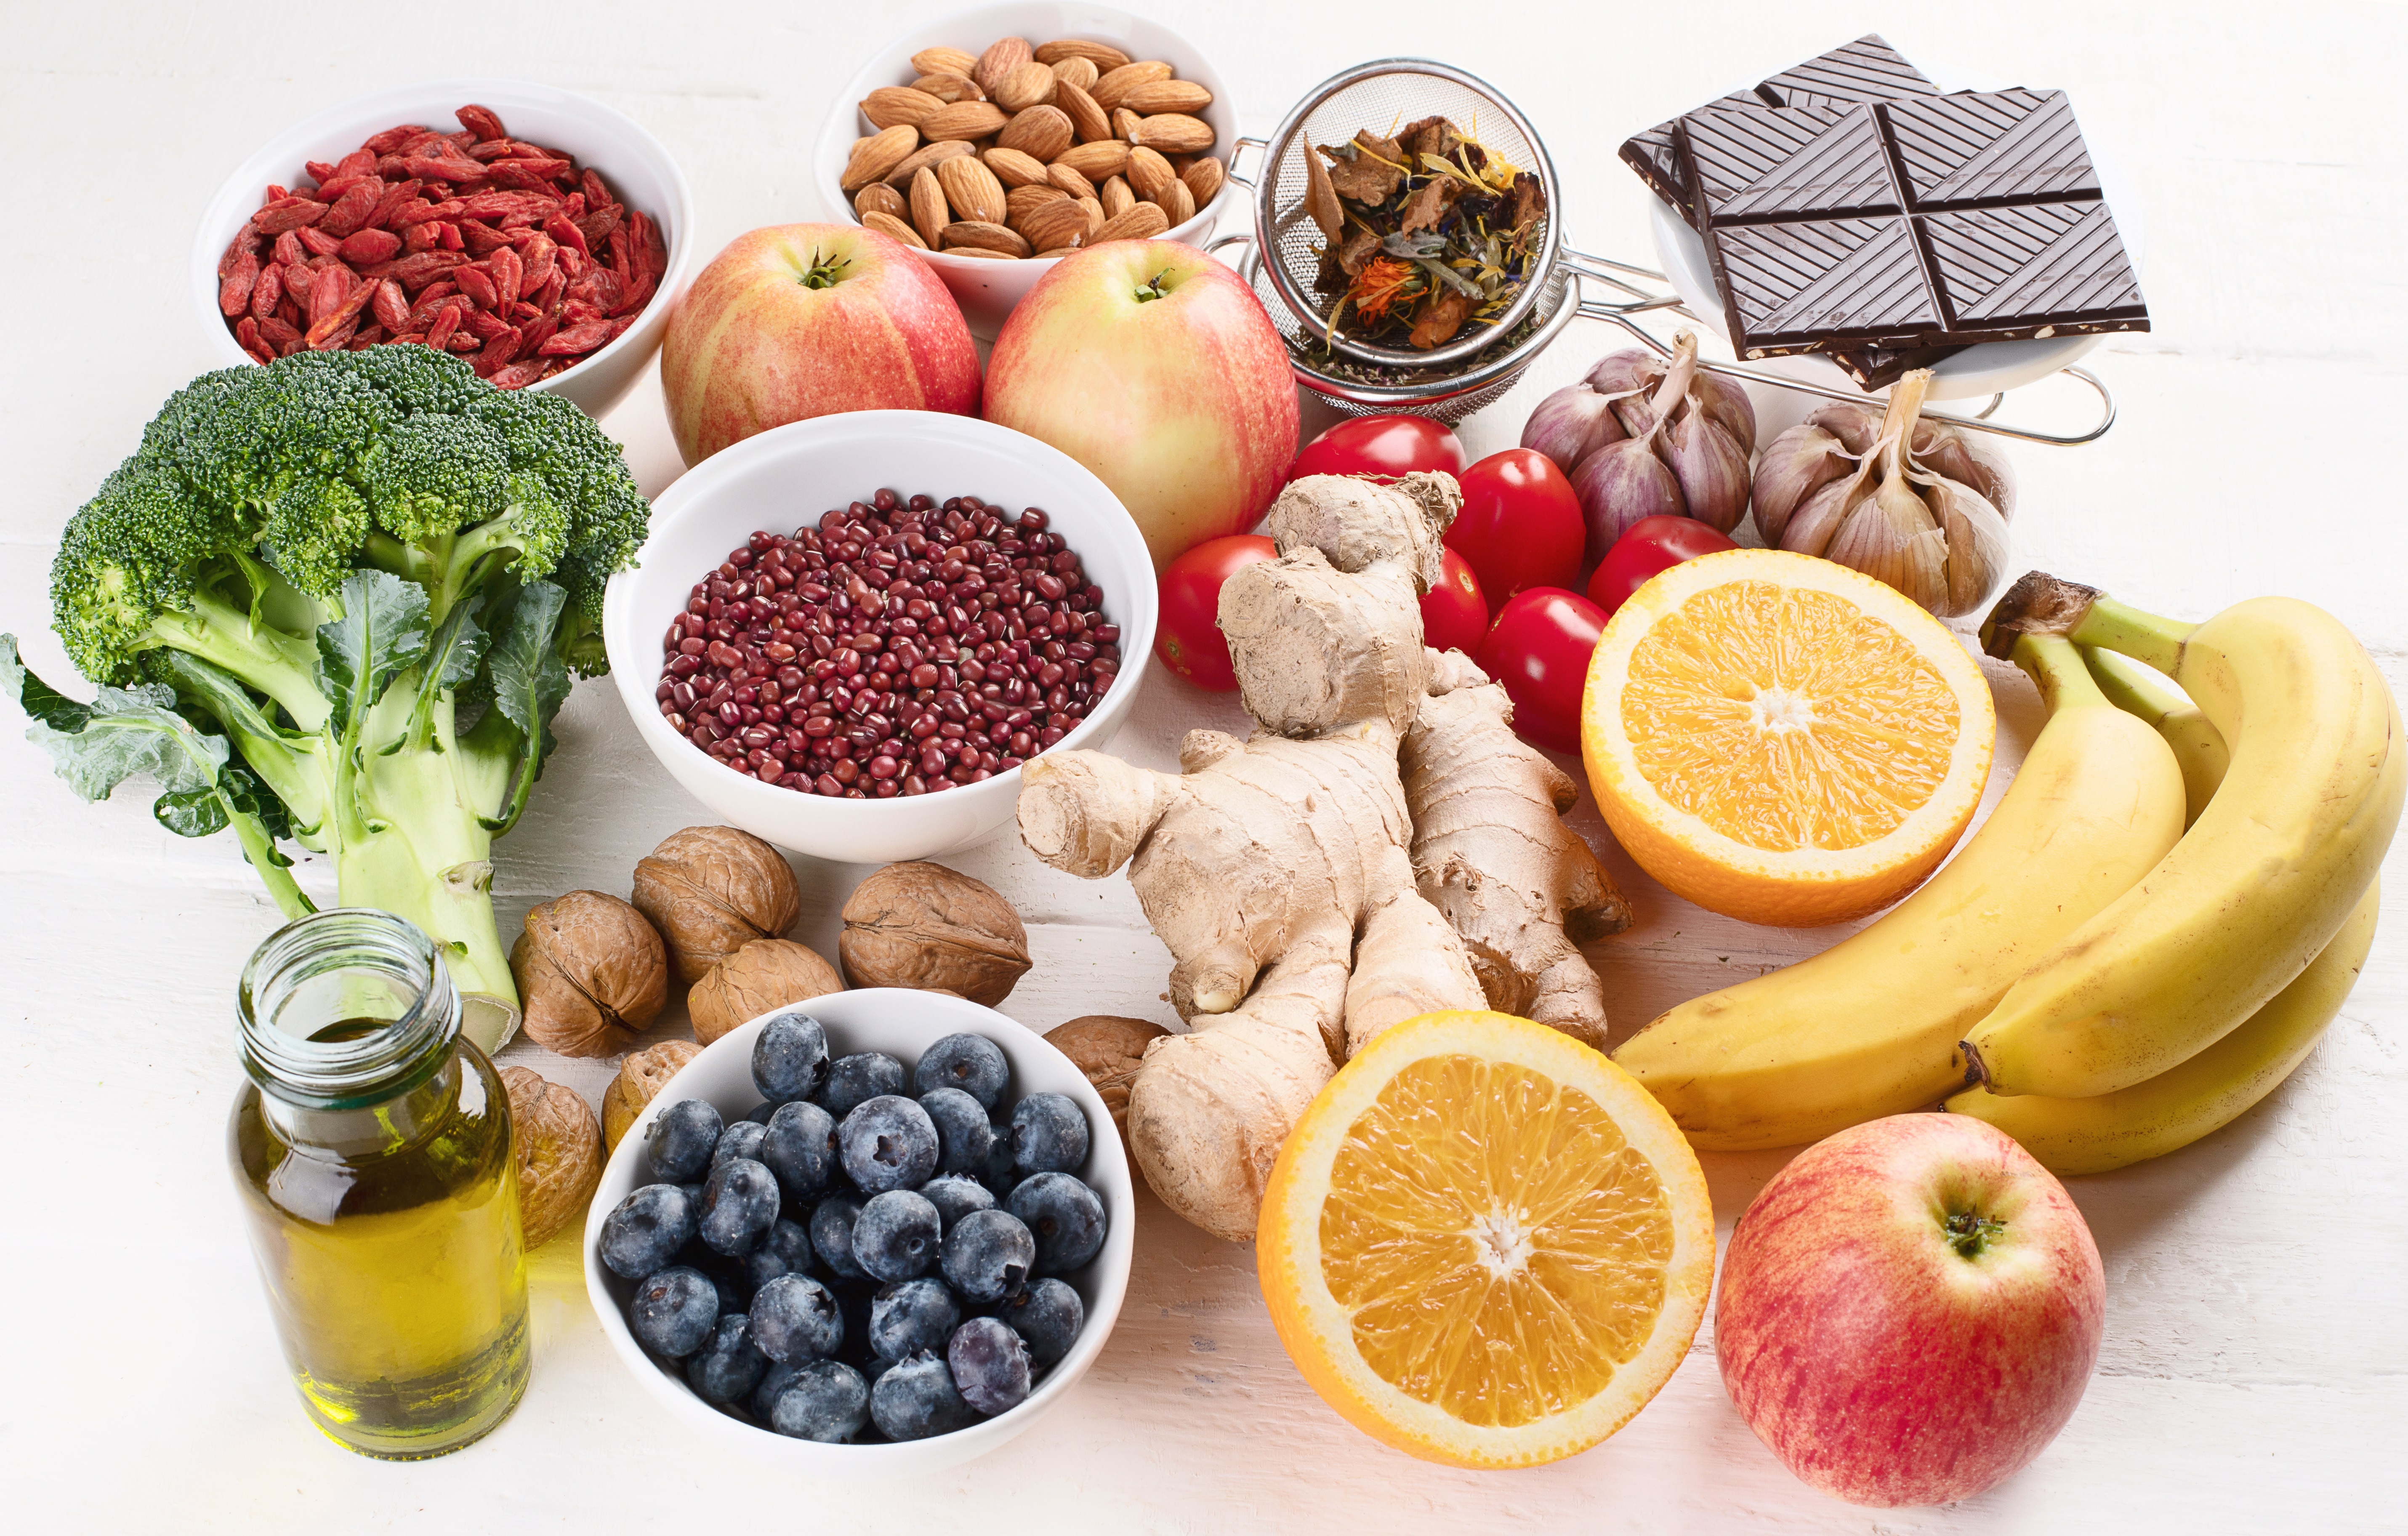 Dietary polyphenols can improve the Health of the elderly when introducing the IPA metabolite, a postbiotic with antioxidant, neuroprotective and anti-inflammatory properties.